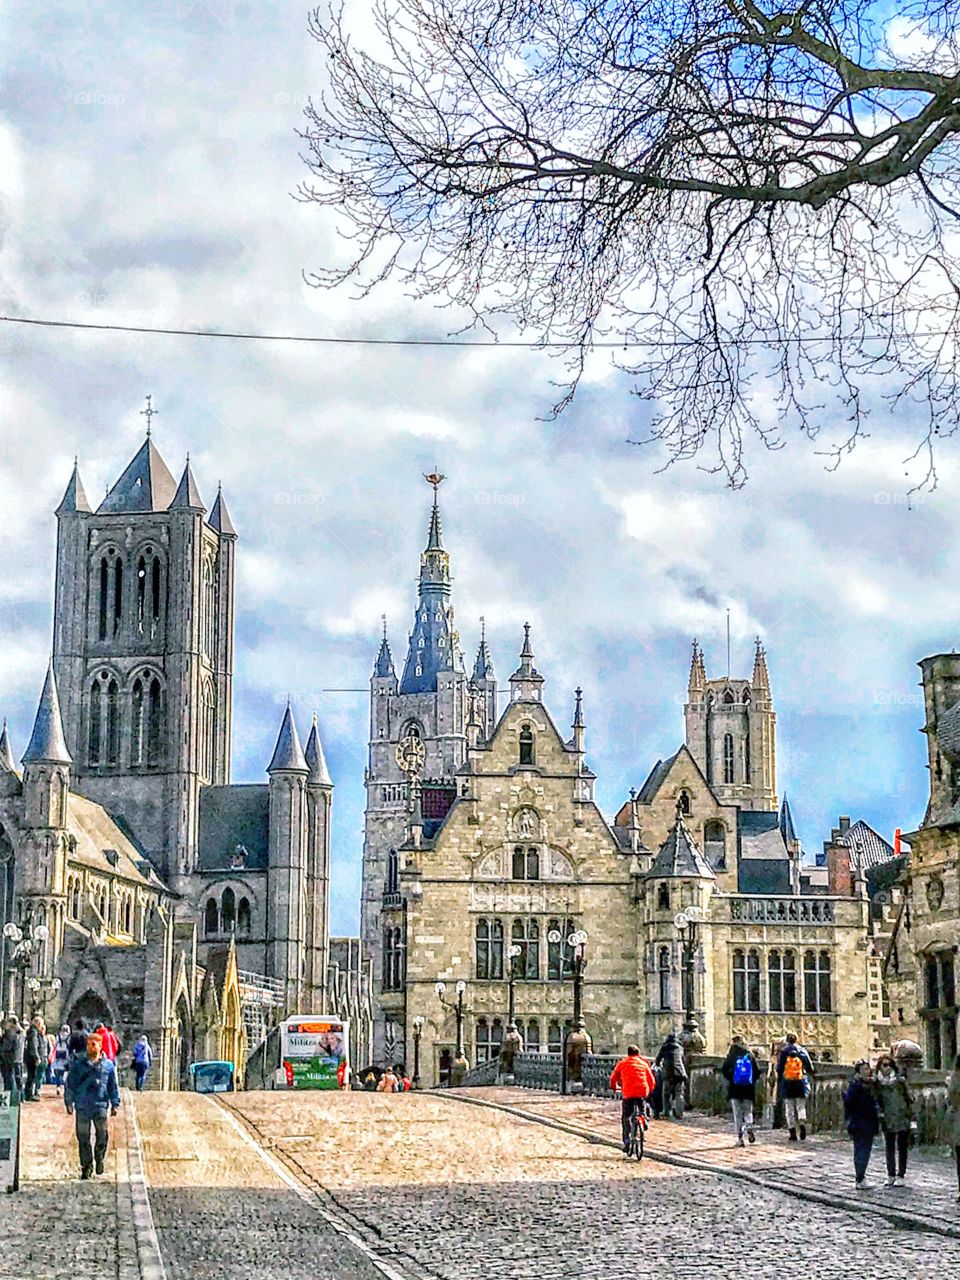 The towers of my beloved Ghent